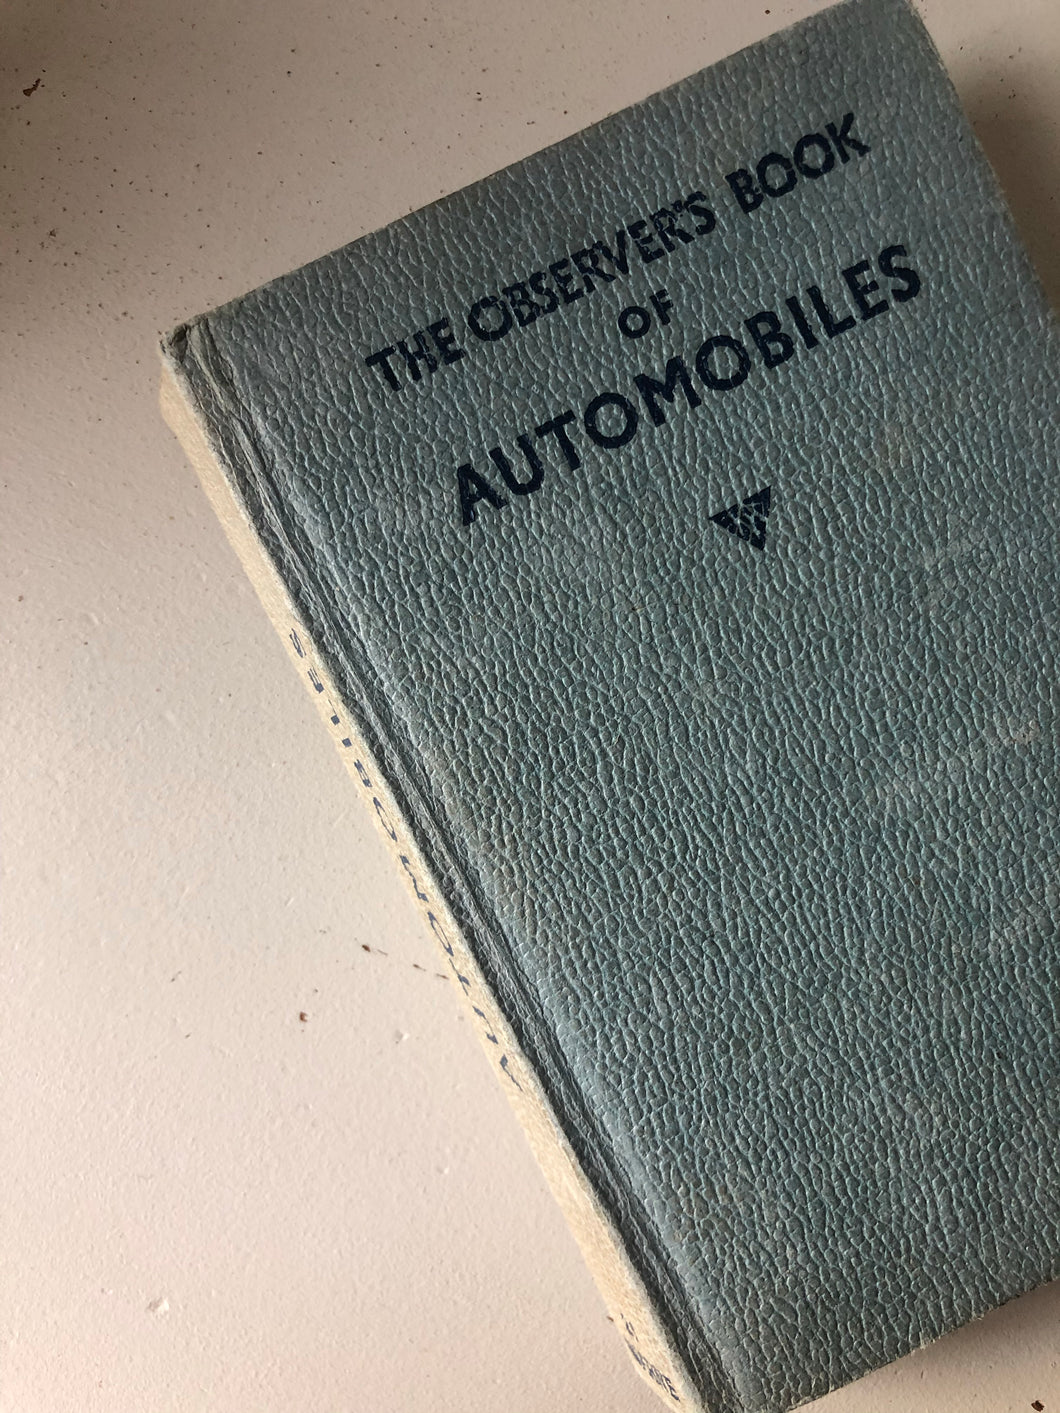 Observer Book of Automobiles